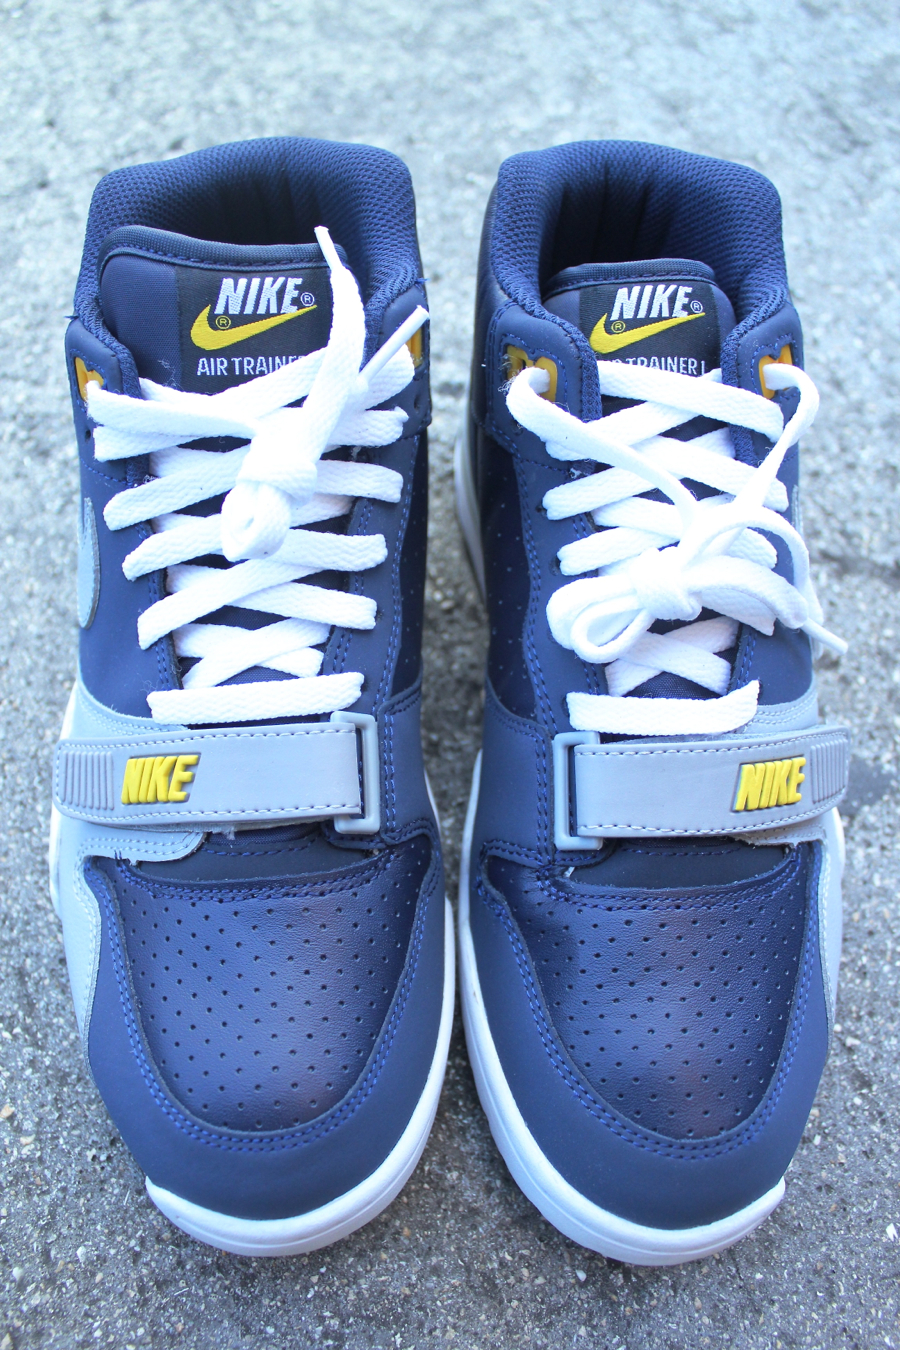 Nike Air Trainer 1 Mid Premium ‘Midnight Navy/Wolf Grey-Obsidian-Tour Yellow’ – New Images